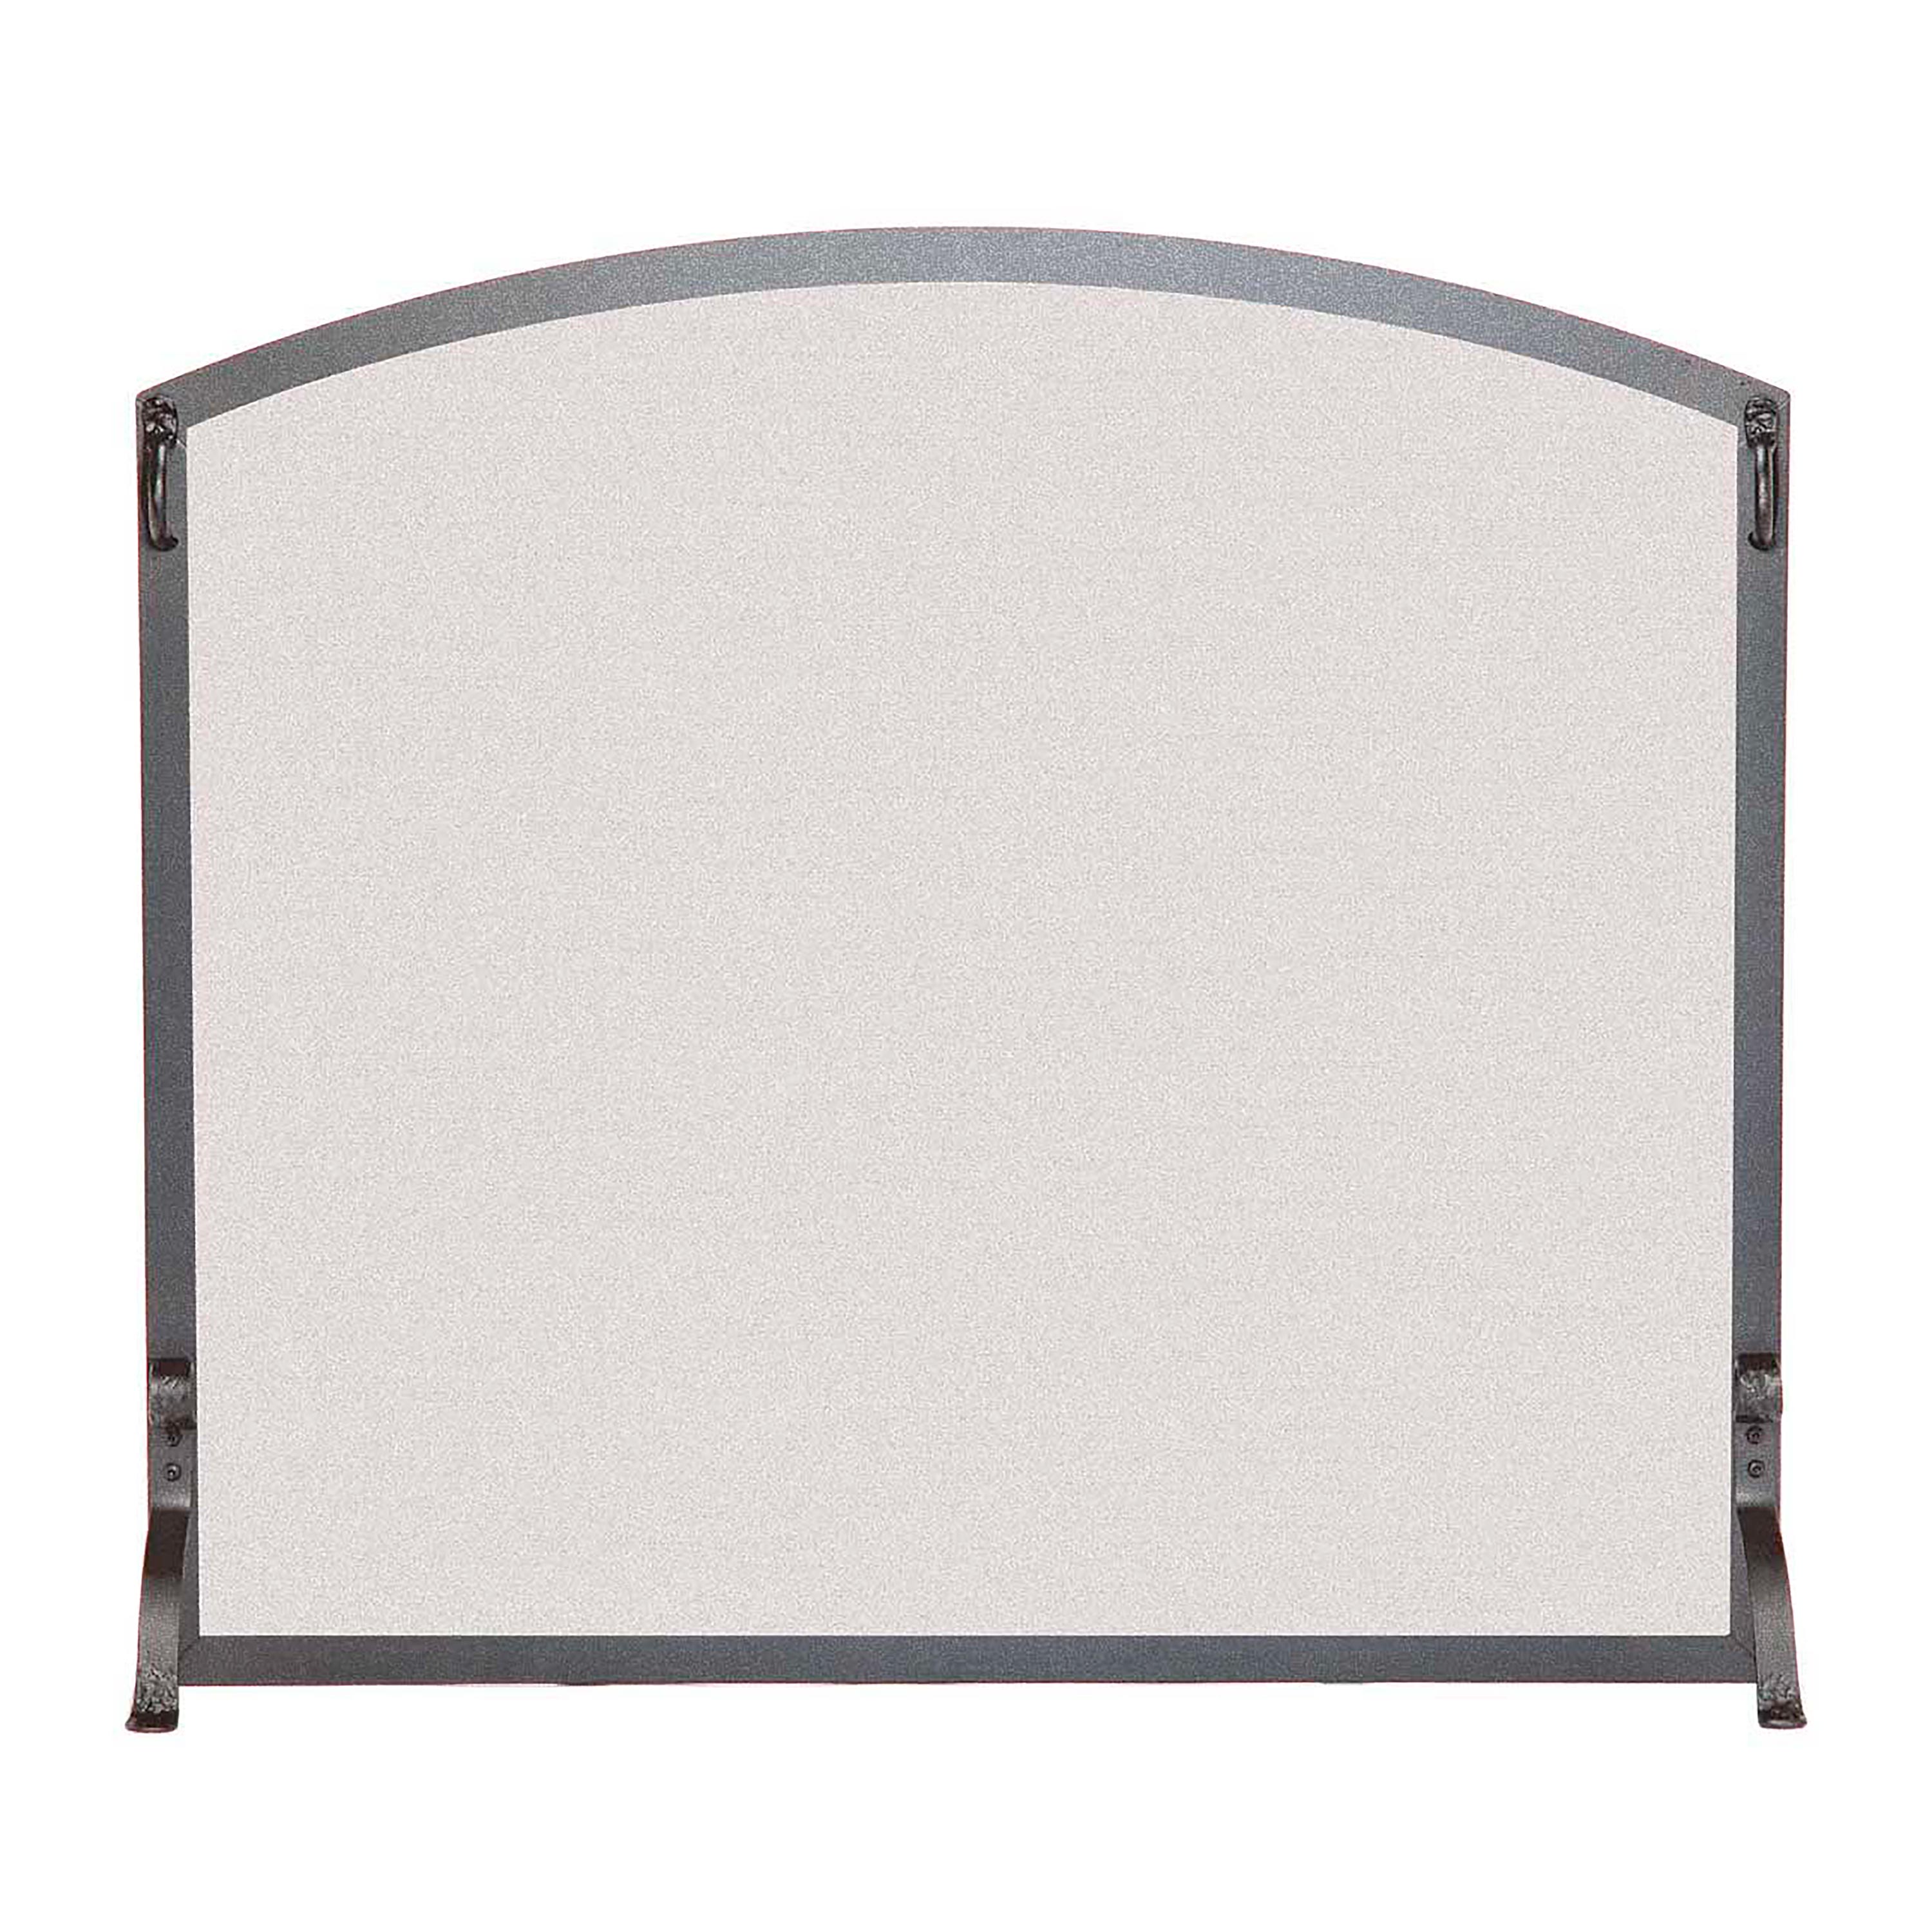 Medium Custom Flat Guard with Arched Top - 1,351 to 2,300 sq. inches